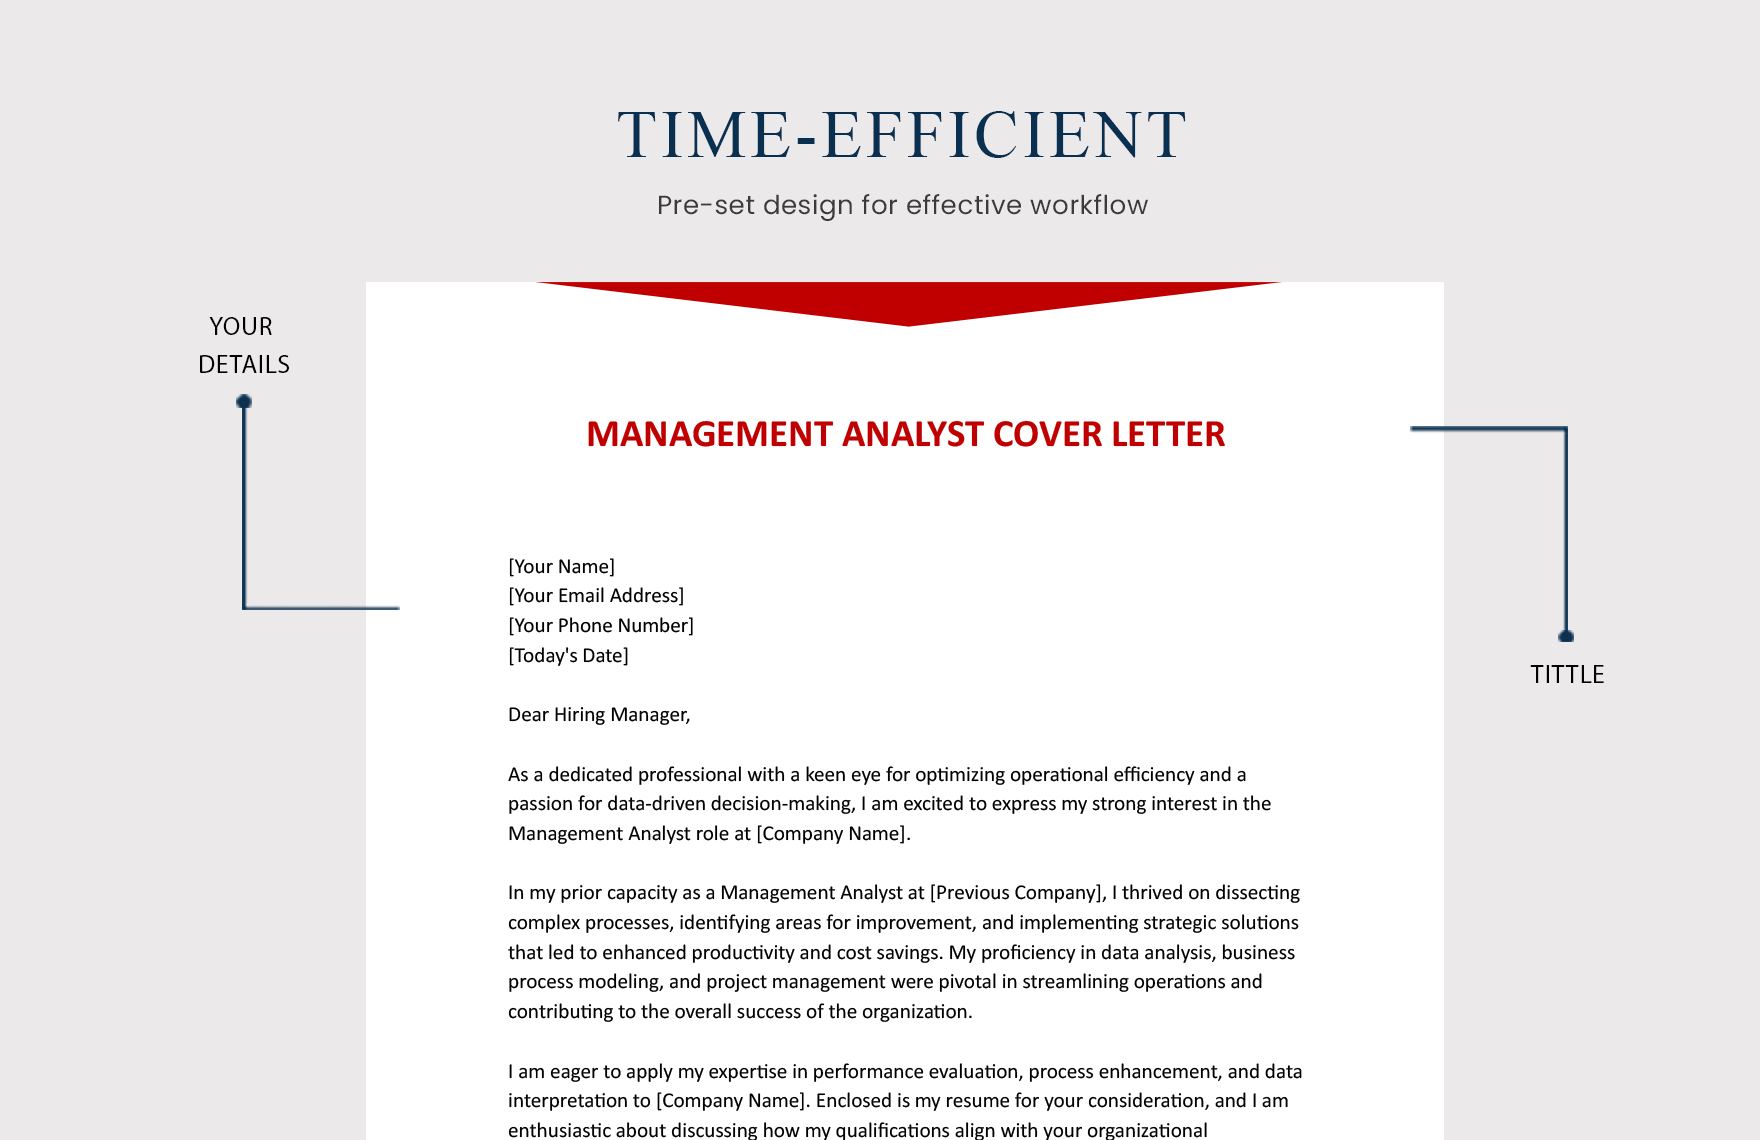 Management Analyst Cover Letter